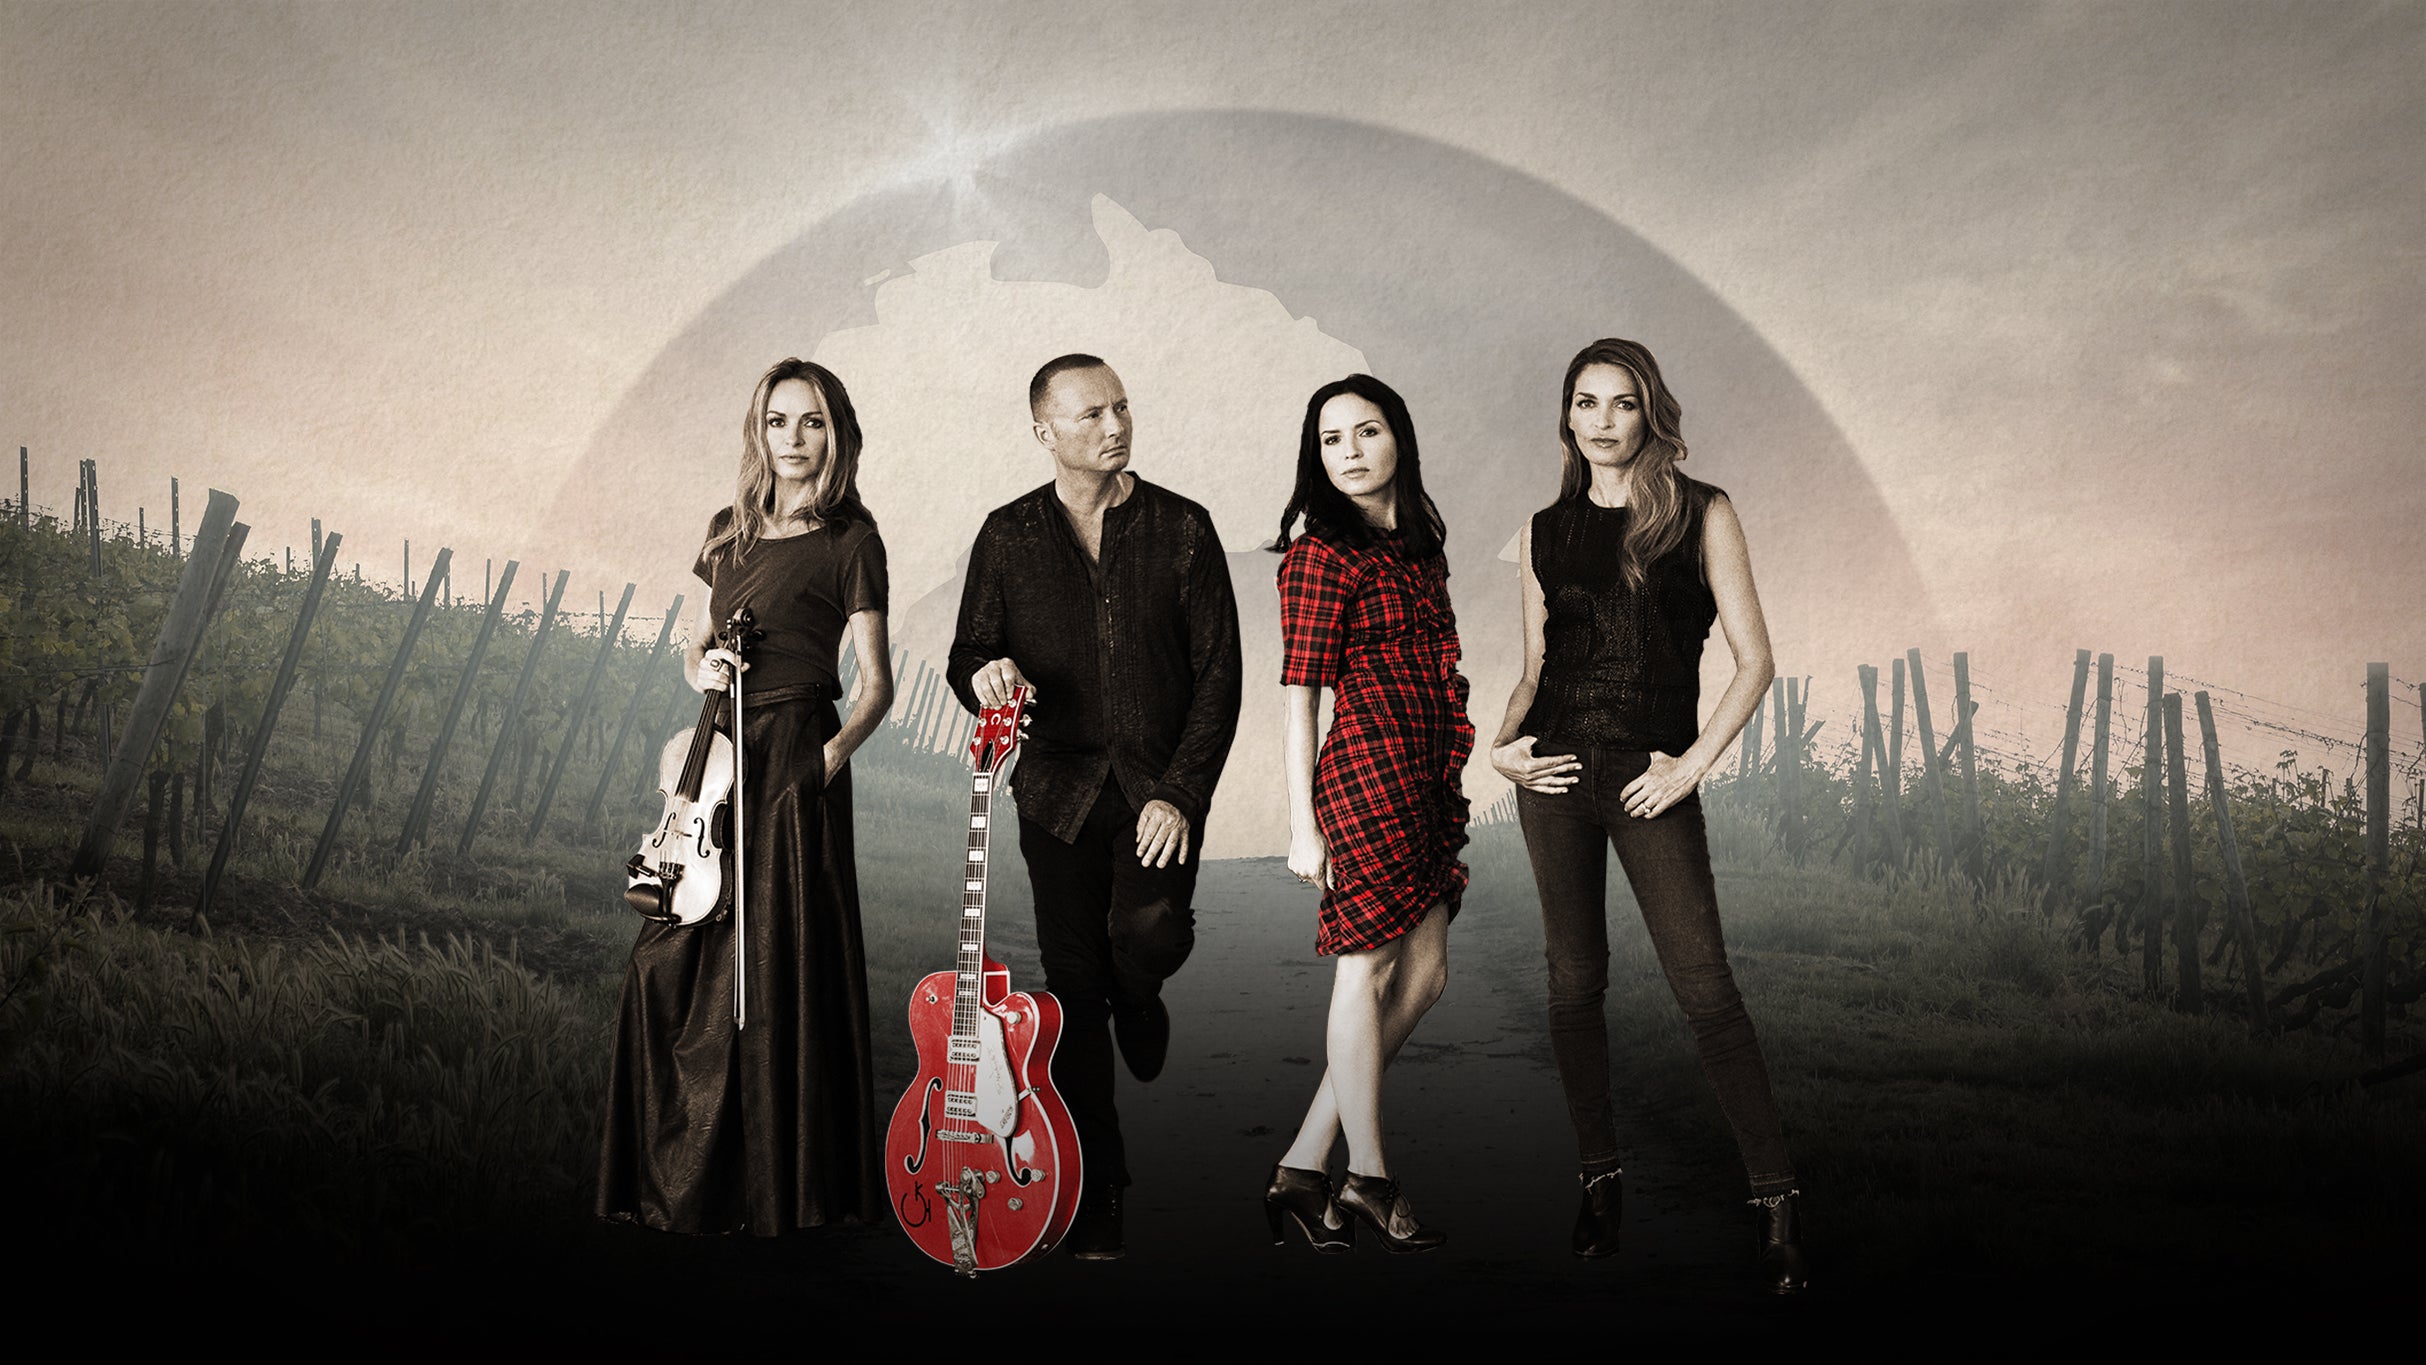 Image used with permission from Ticketmaster | The Corrs tickets